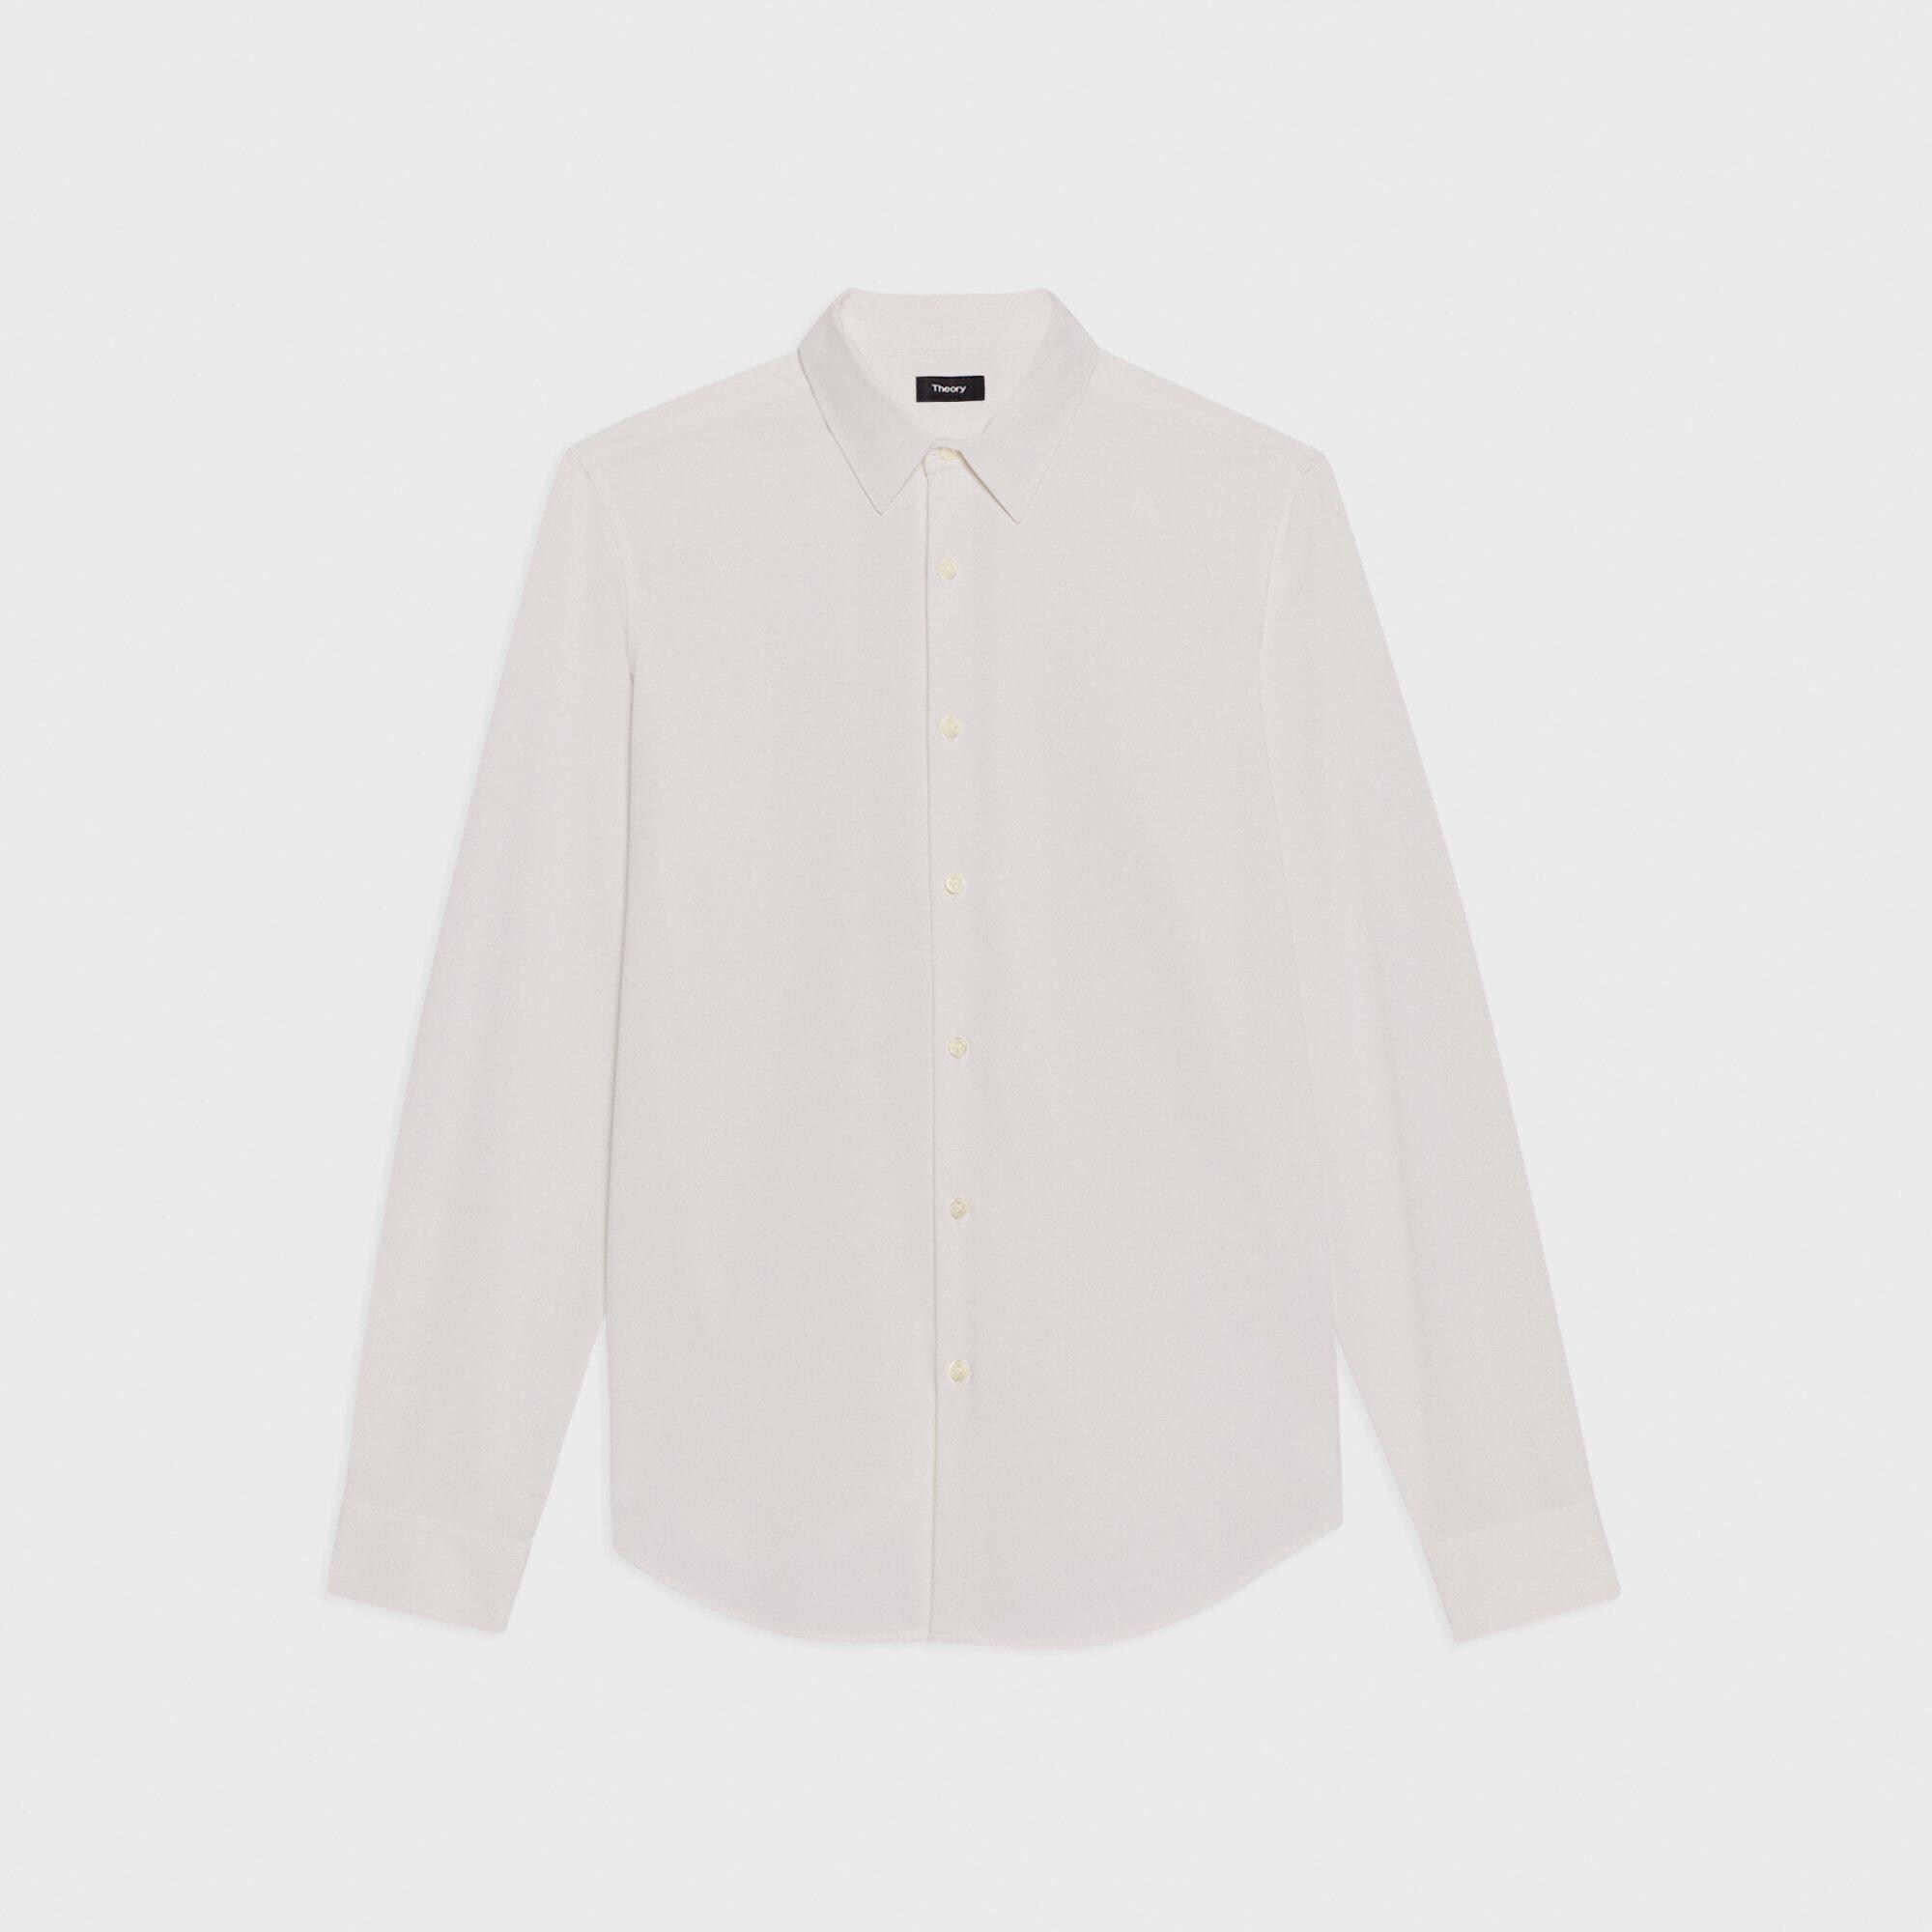 Men's Sport and Dress Shirts | Theory